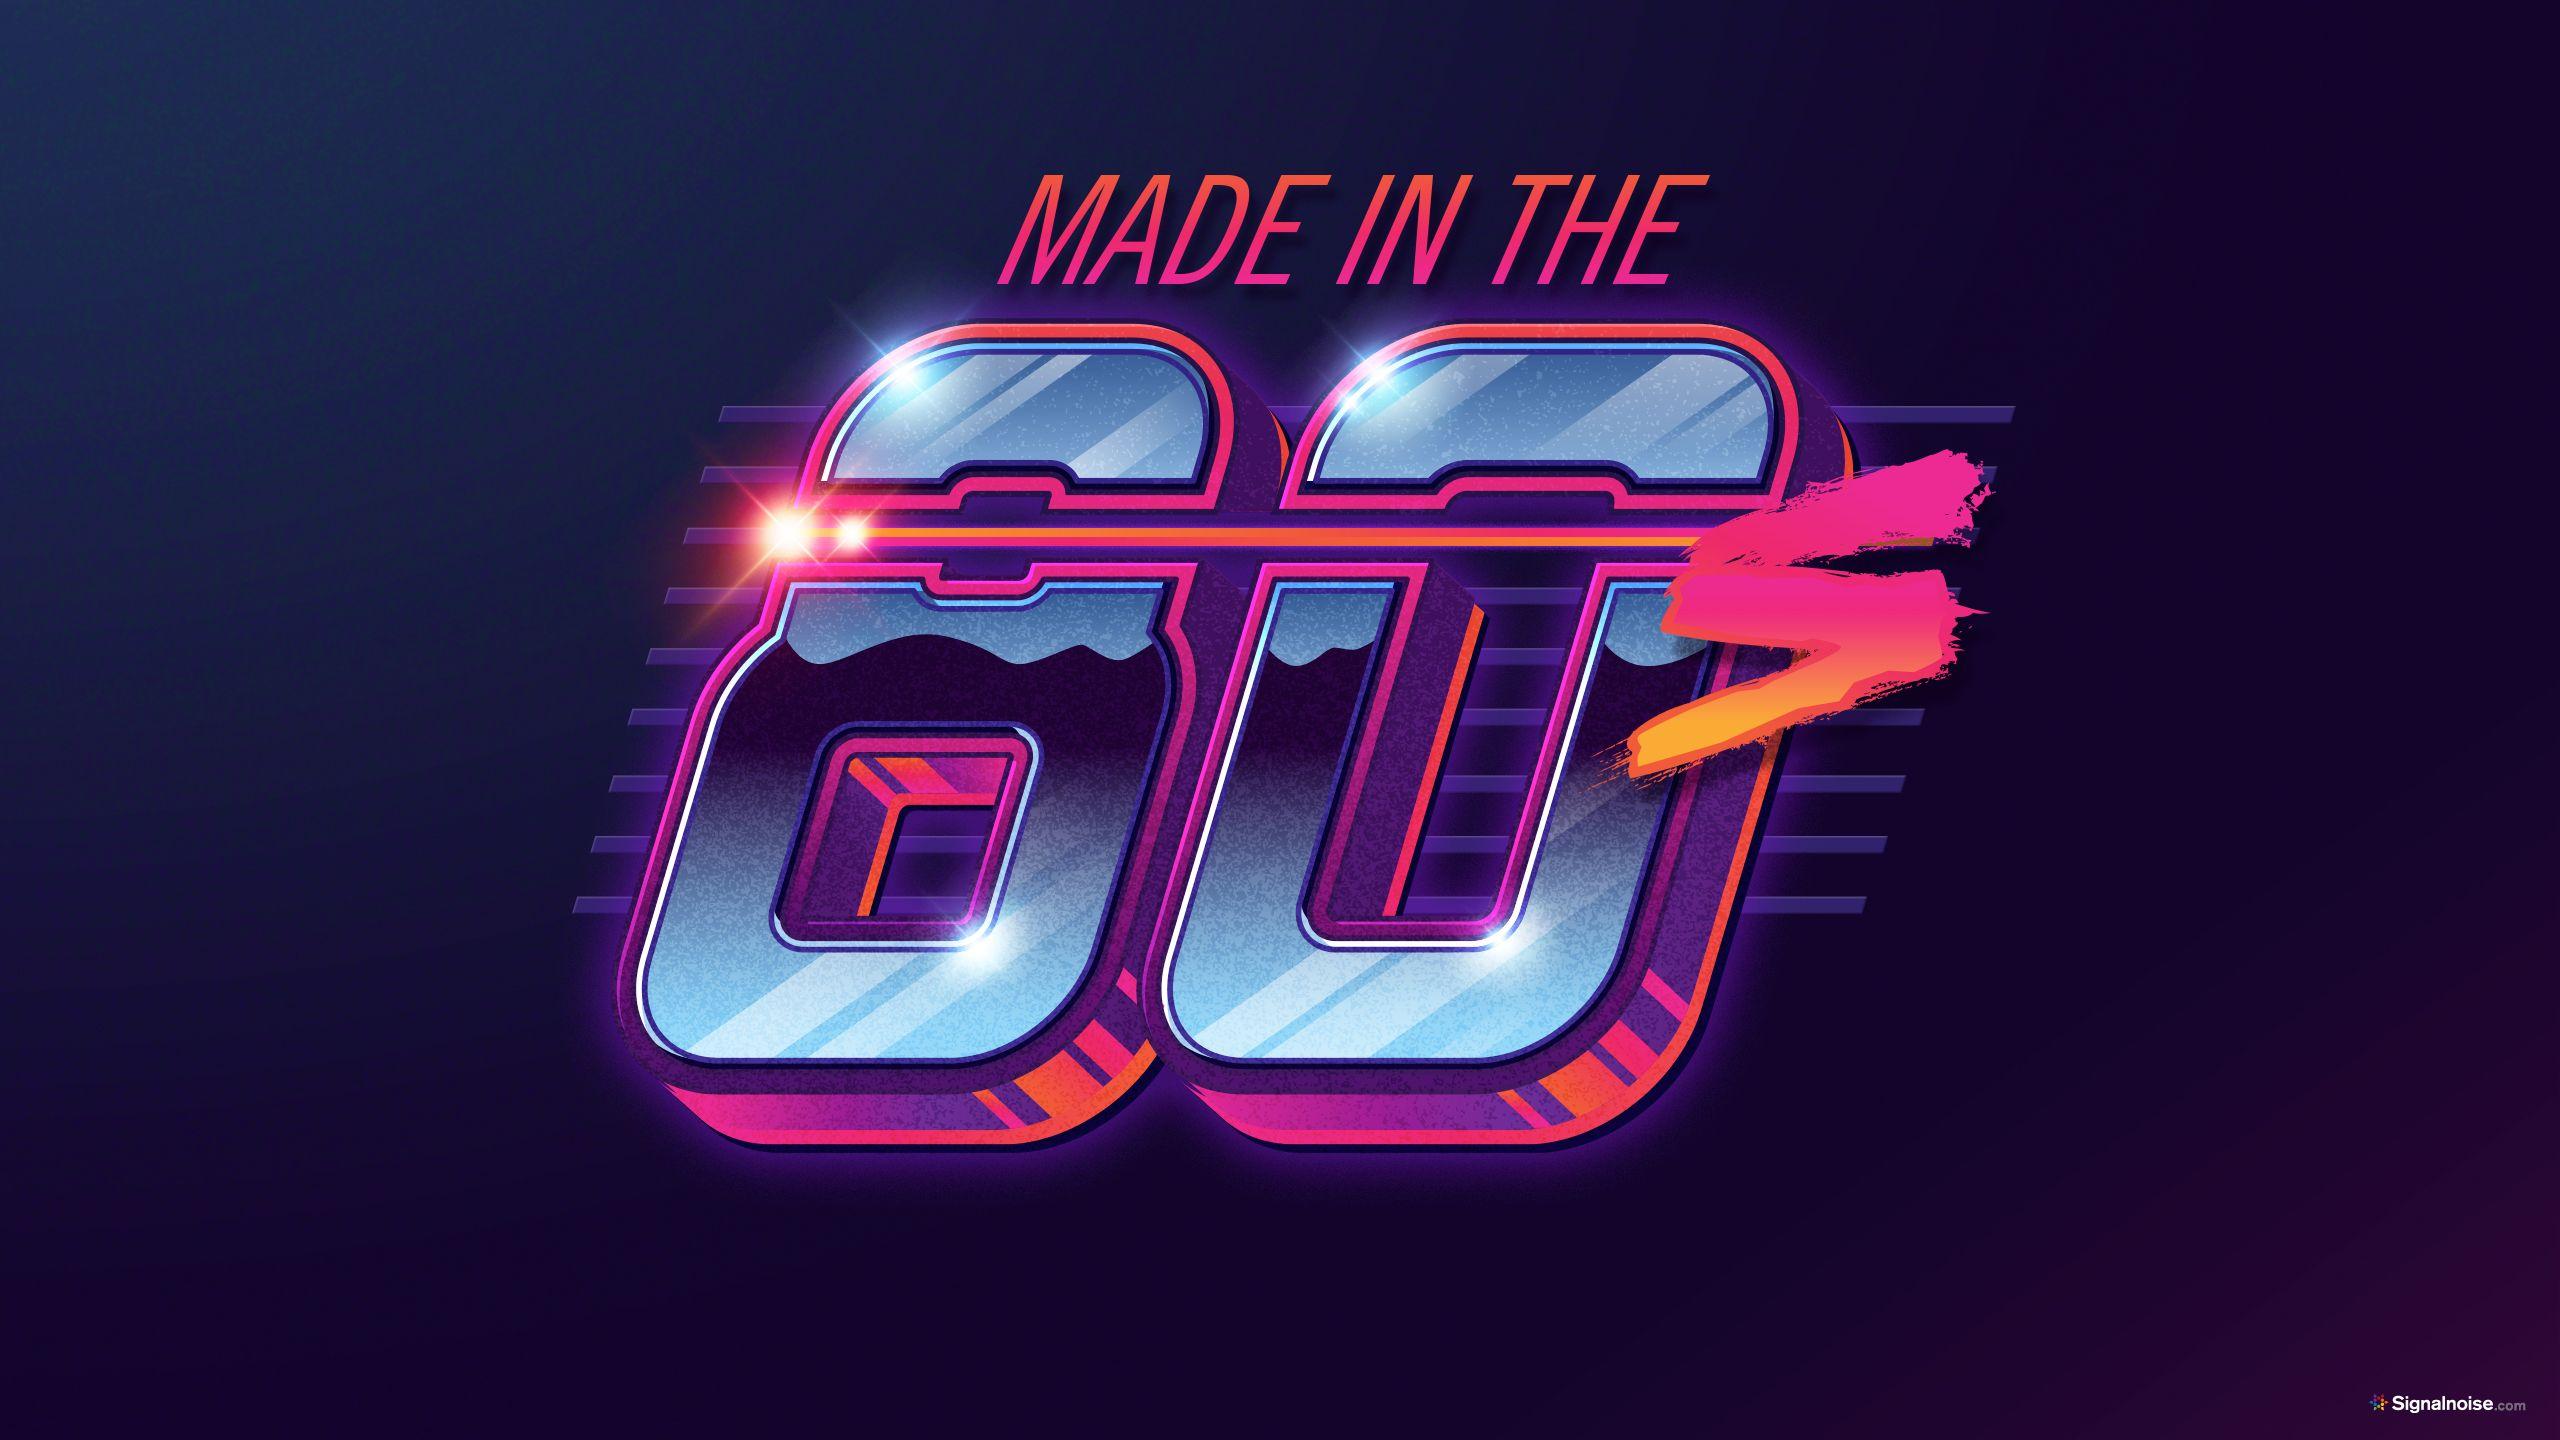 Made in the 80s' wallpapers by Signalnoise. Desktop and mobile. Right